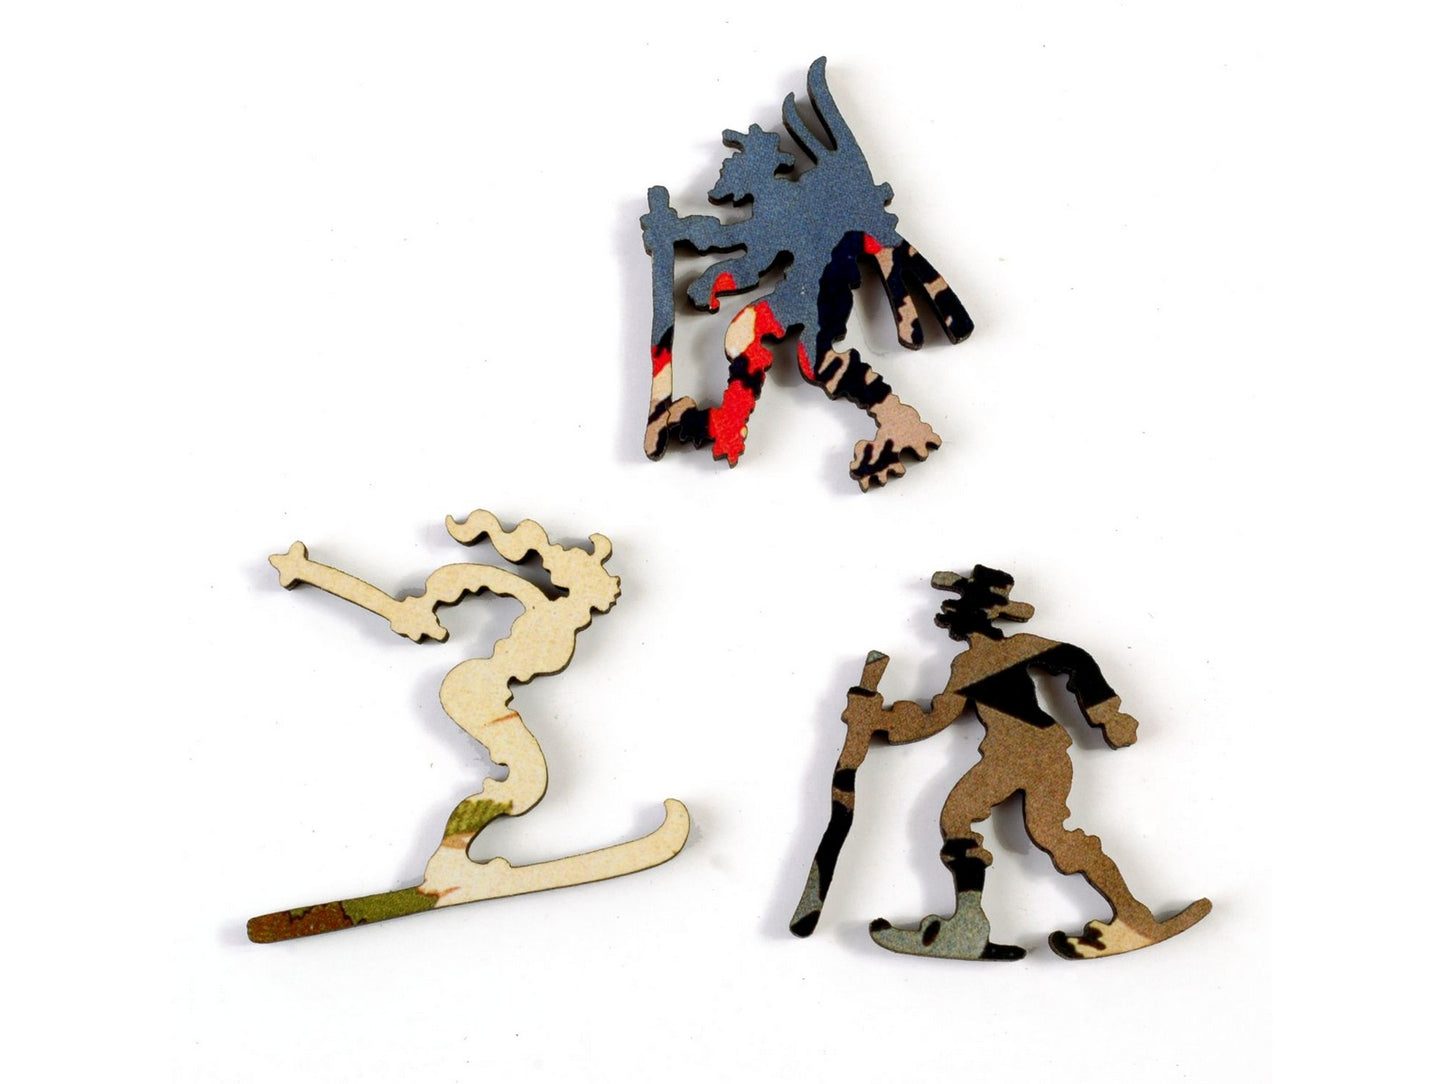 A closeup of pieces, in the shapes of three people skiing.